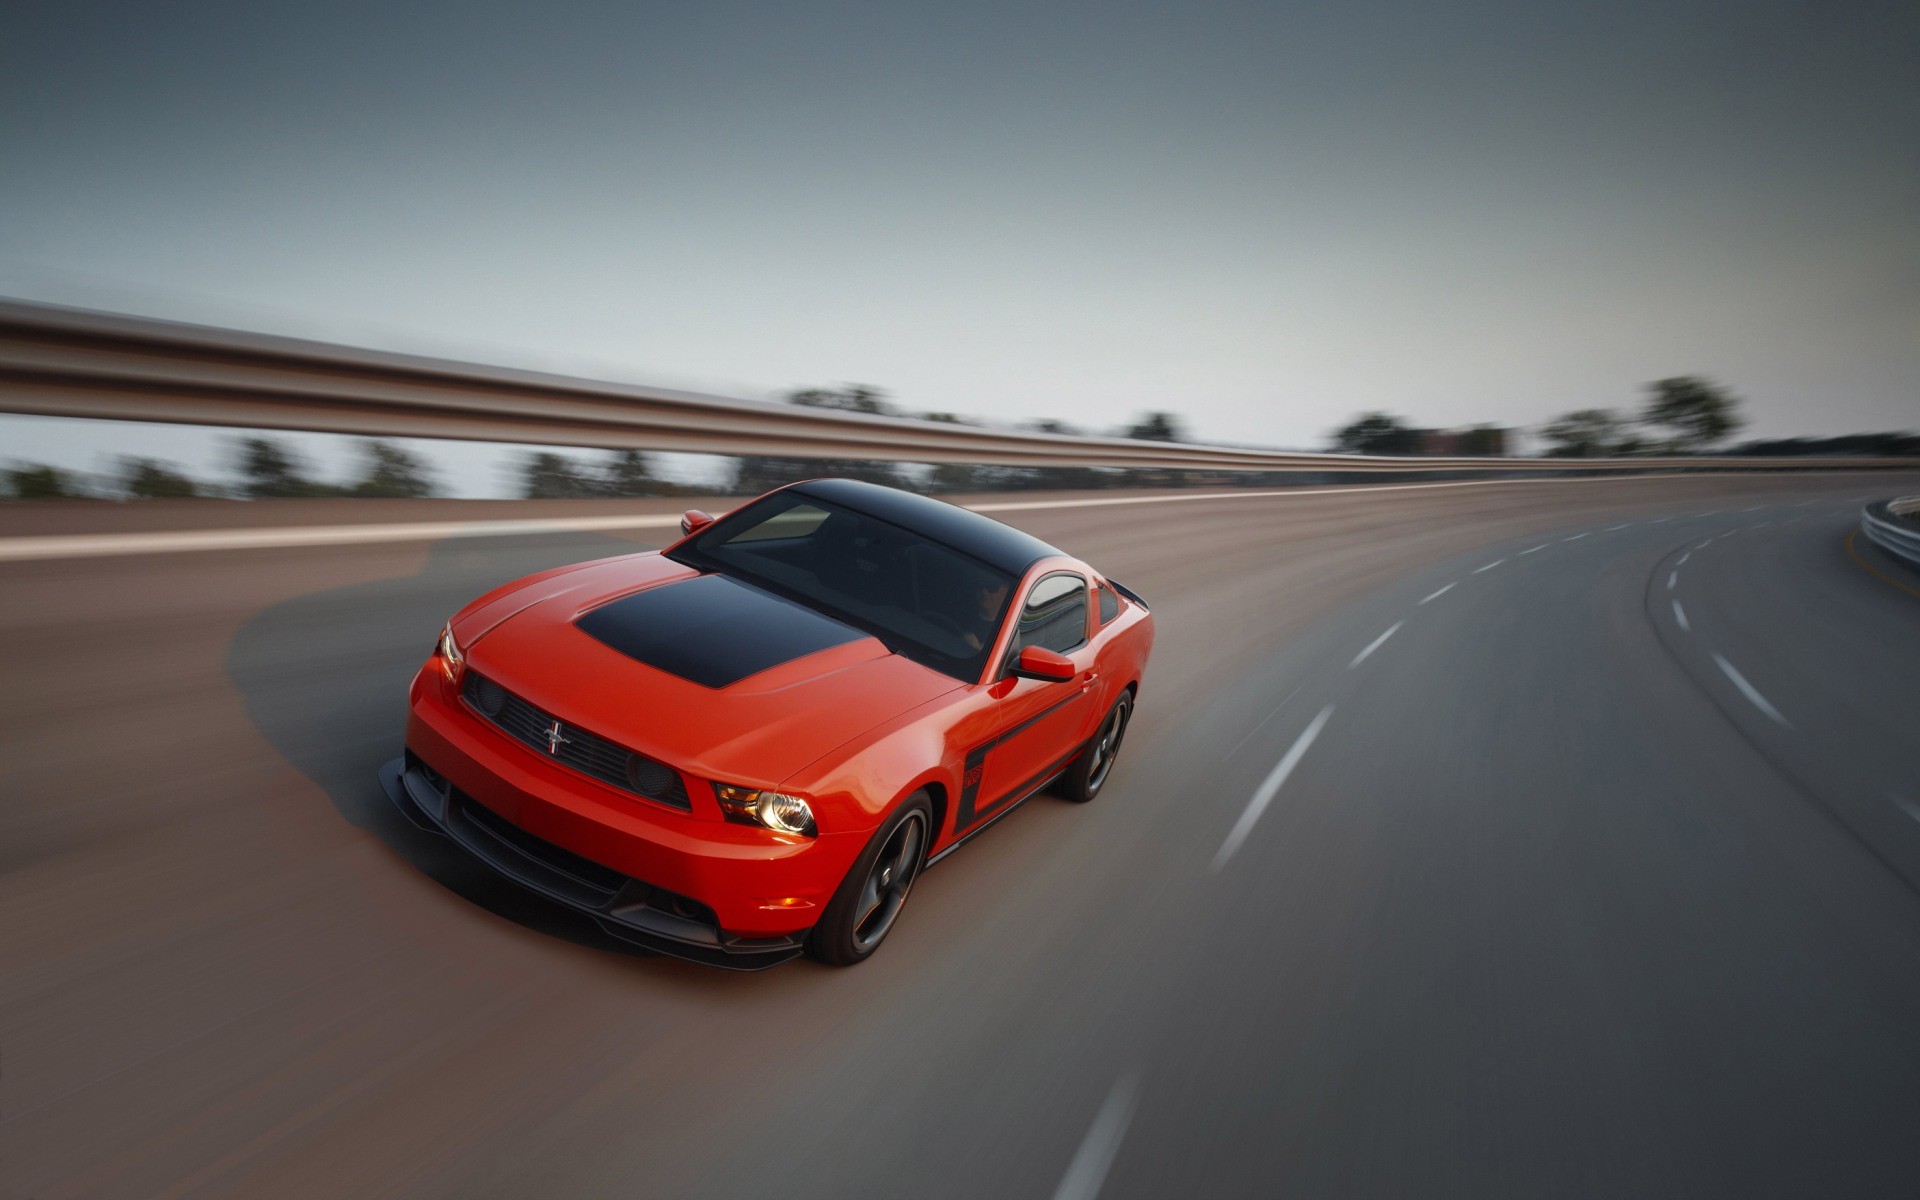 General 1920x1200 car Ford Ford Mustang red cars vehicle asphalt Ford Mustang S-197 II banked turn muscle cars American cars